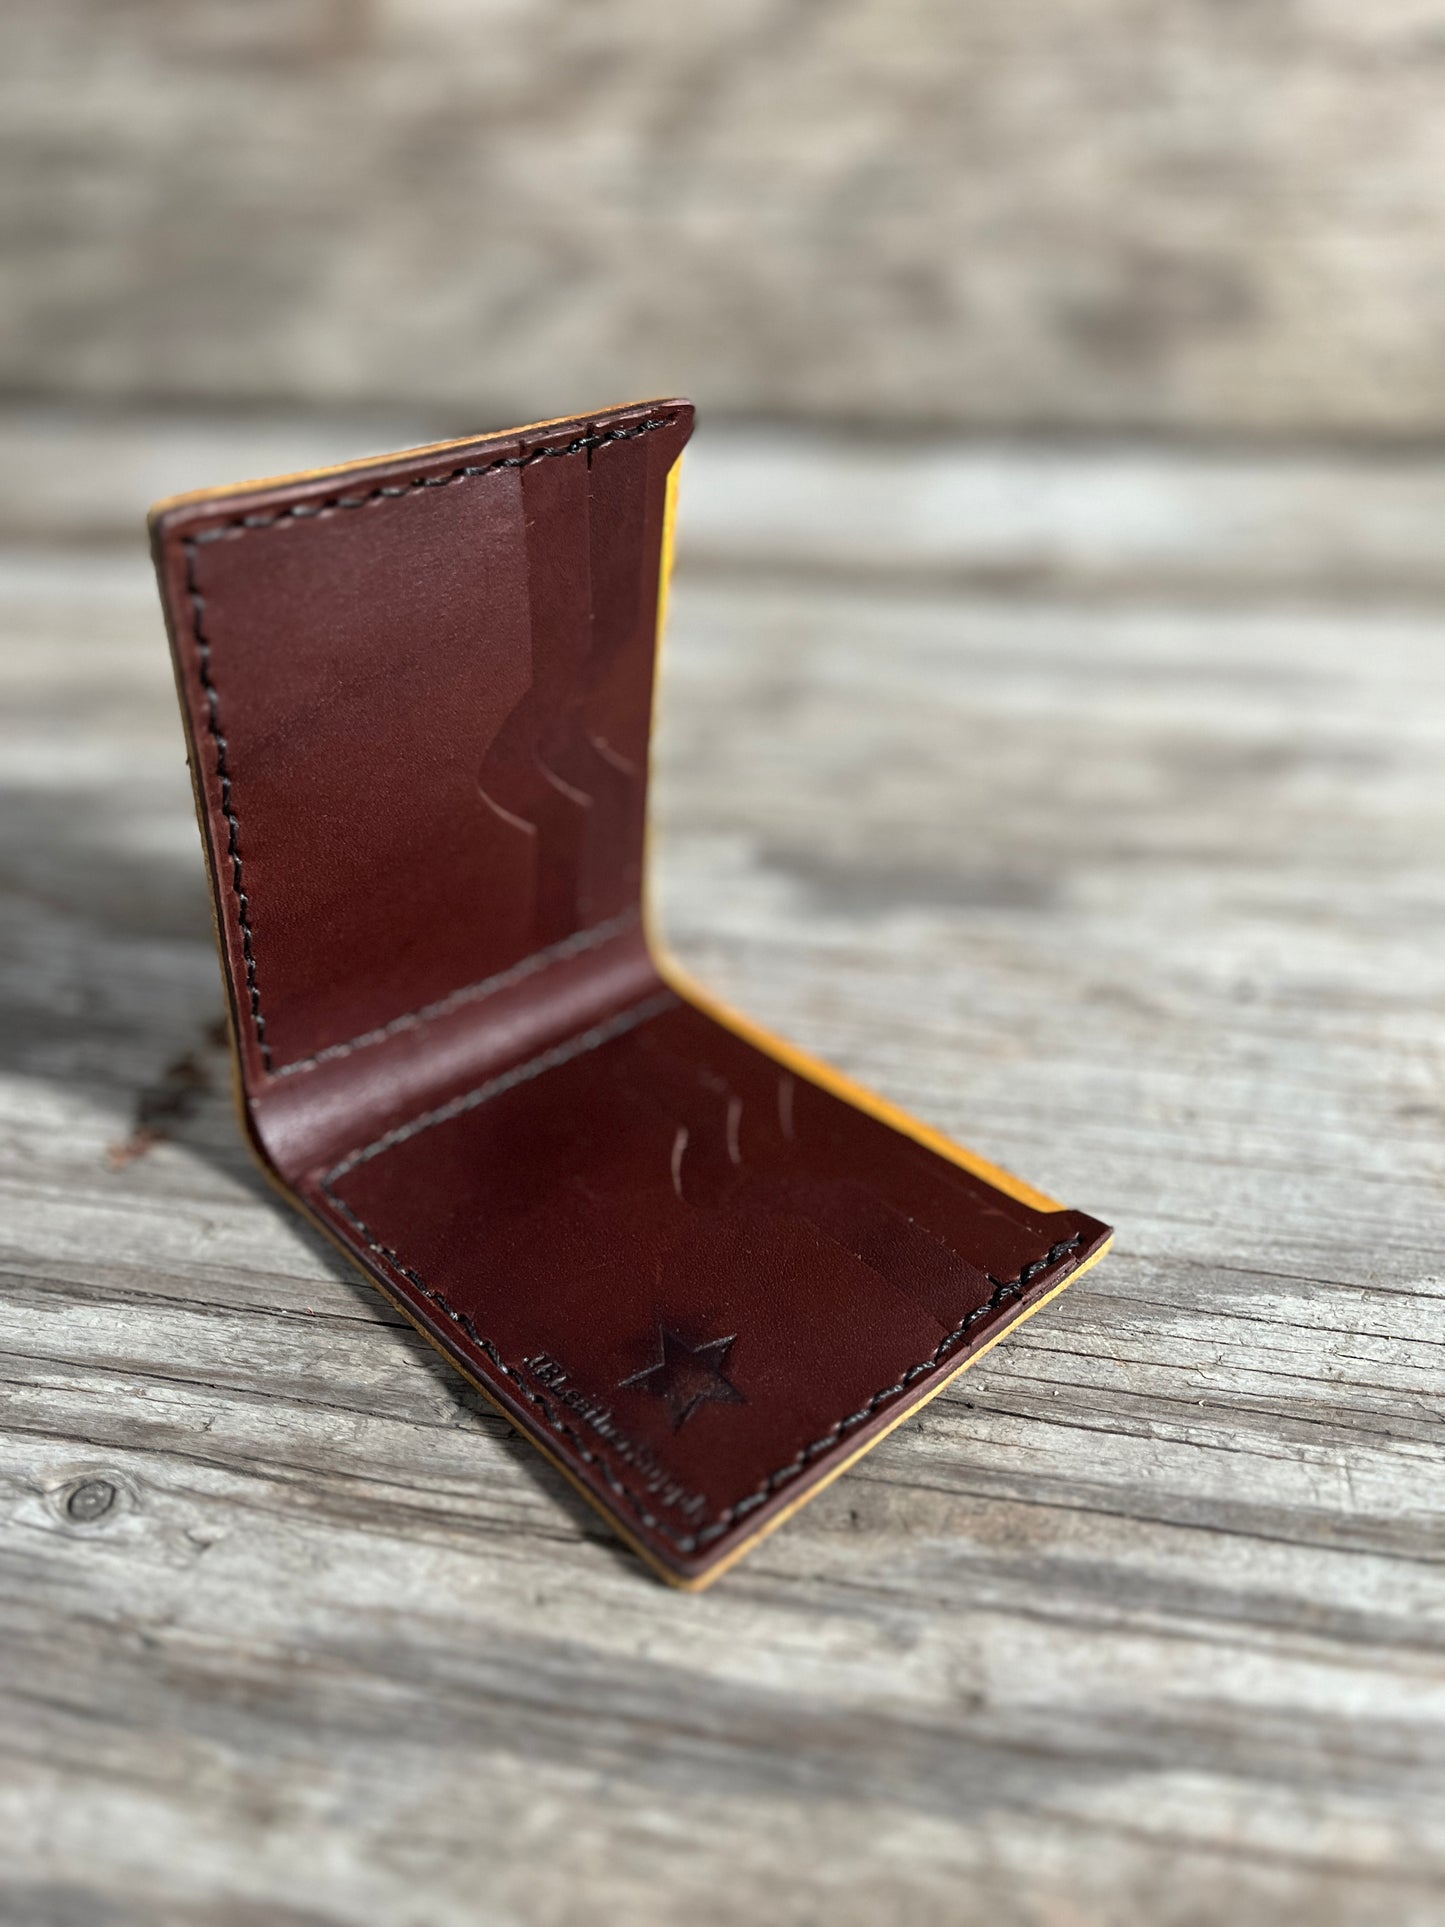 Handmade Leather Bifold Wallet-Brown and Thistle Patterned Iconic